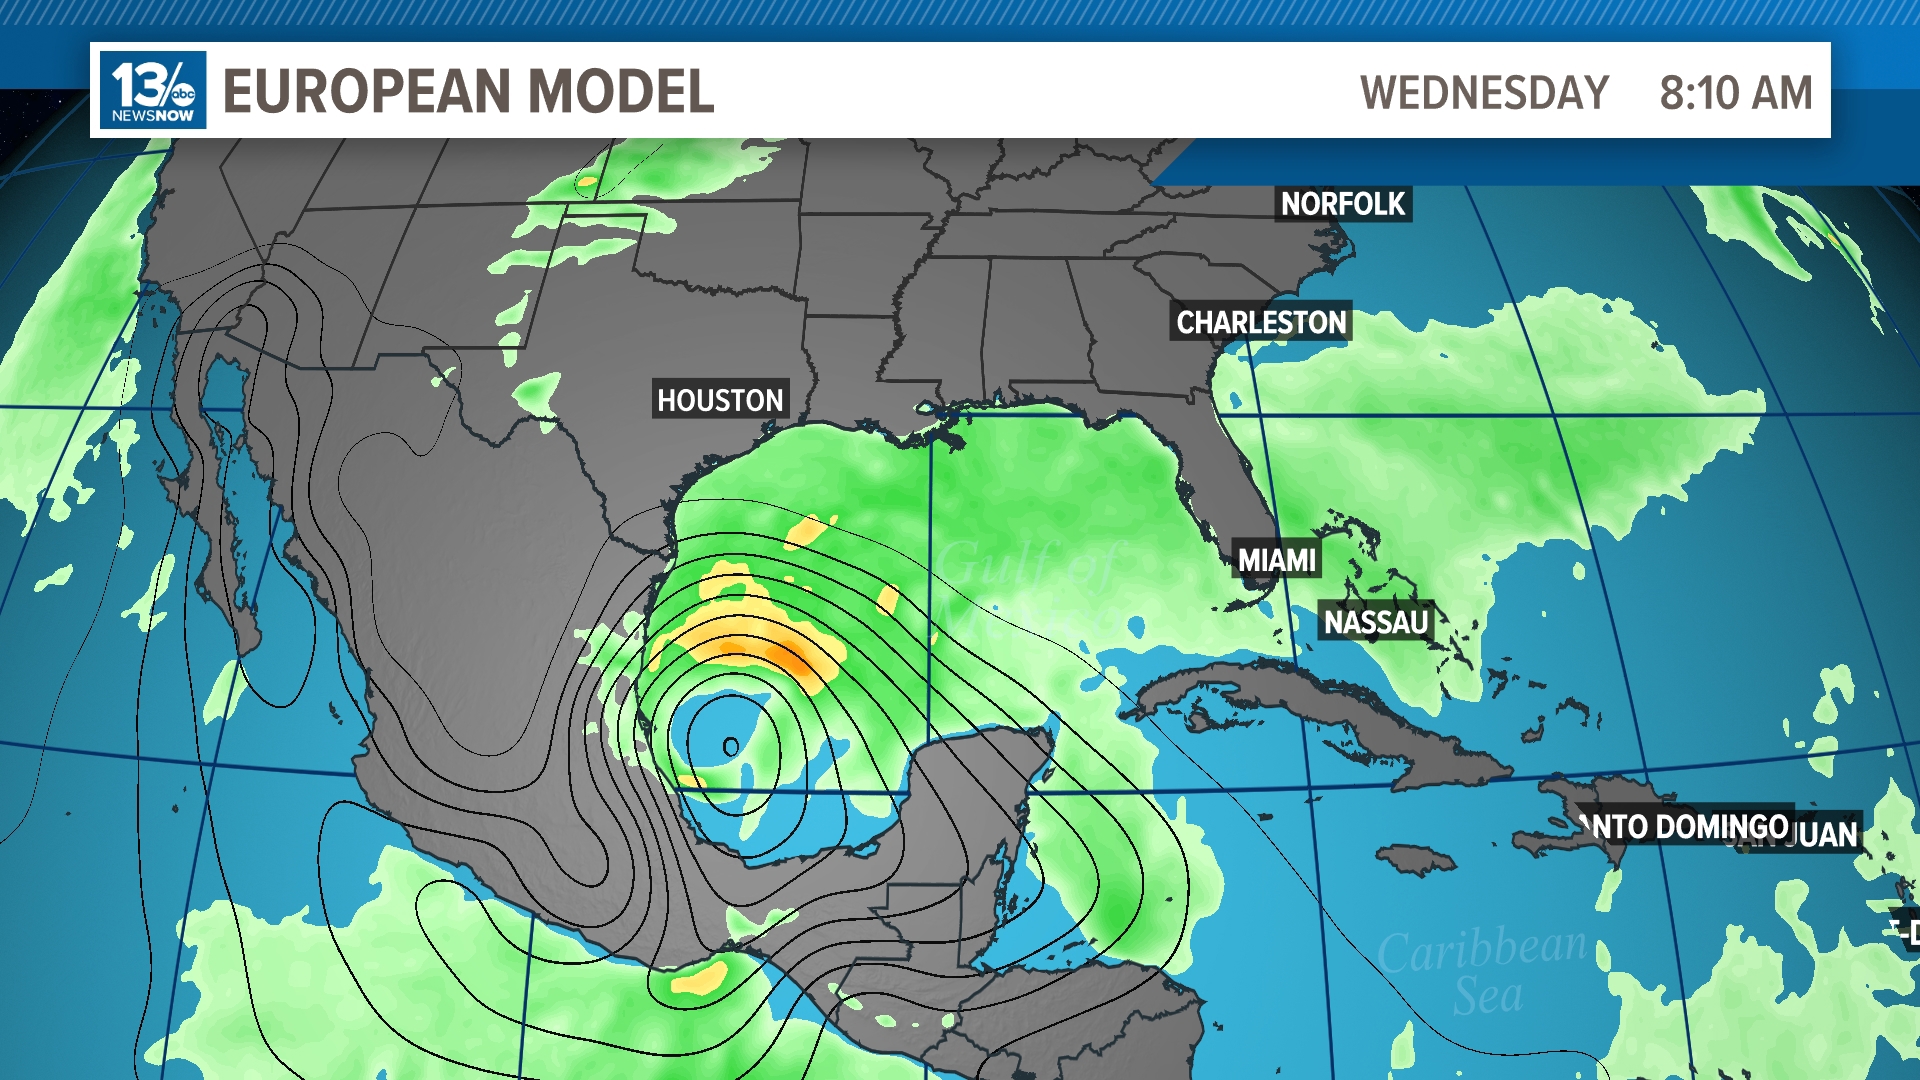 Florida is finally catching a break, but the southern Gulf of Mexico could be a trouble spot next week.